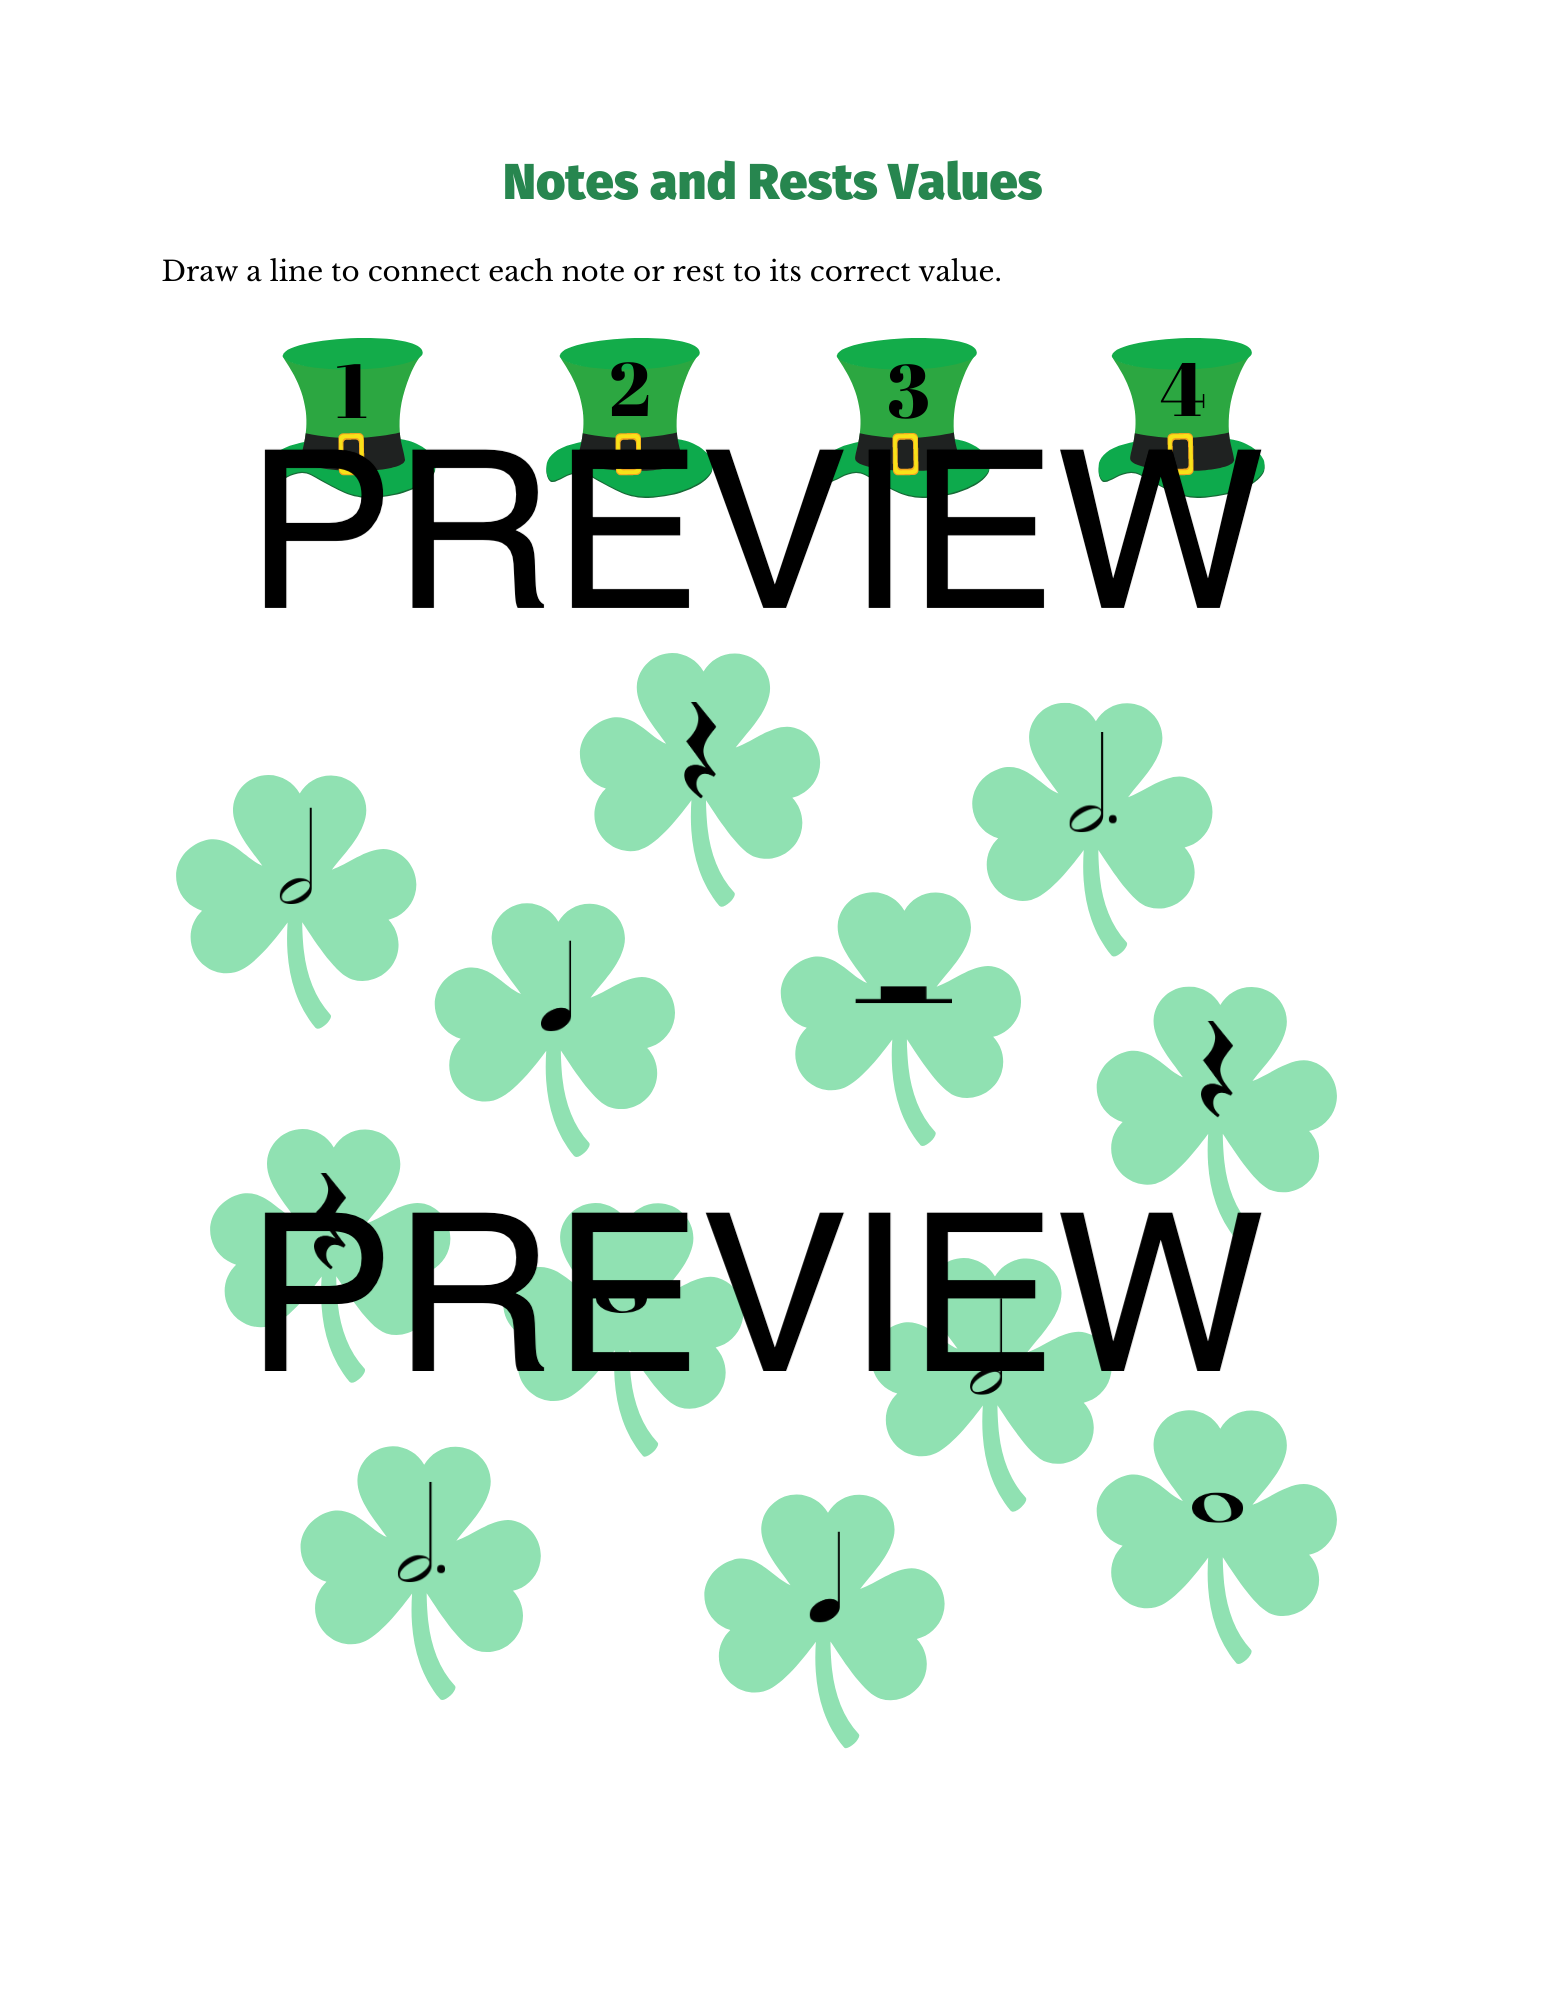 st. patrick's day music worksheets for beginners